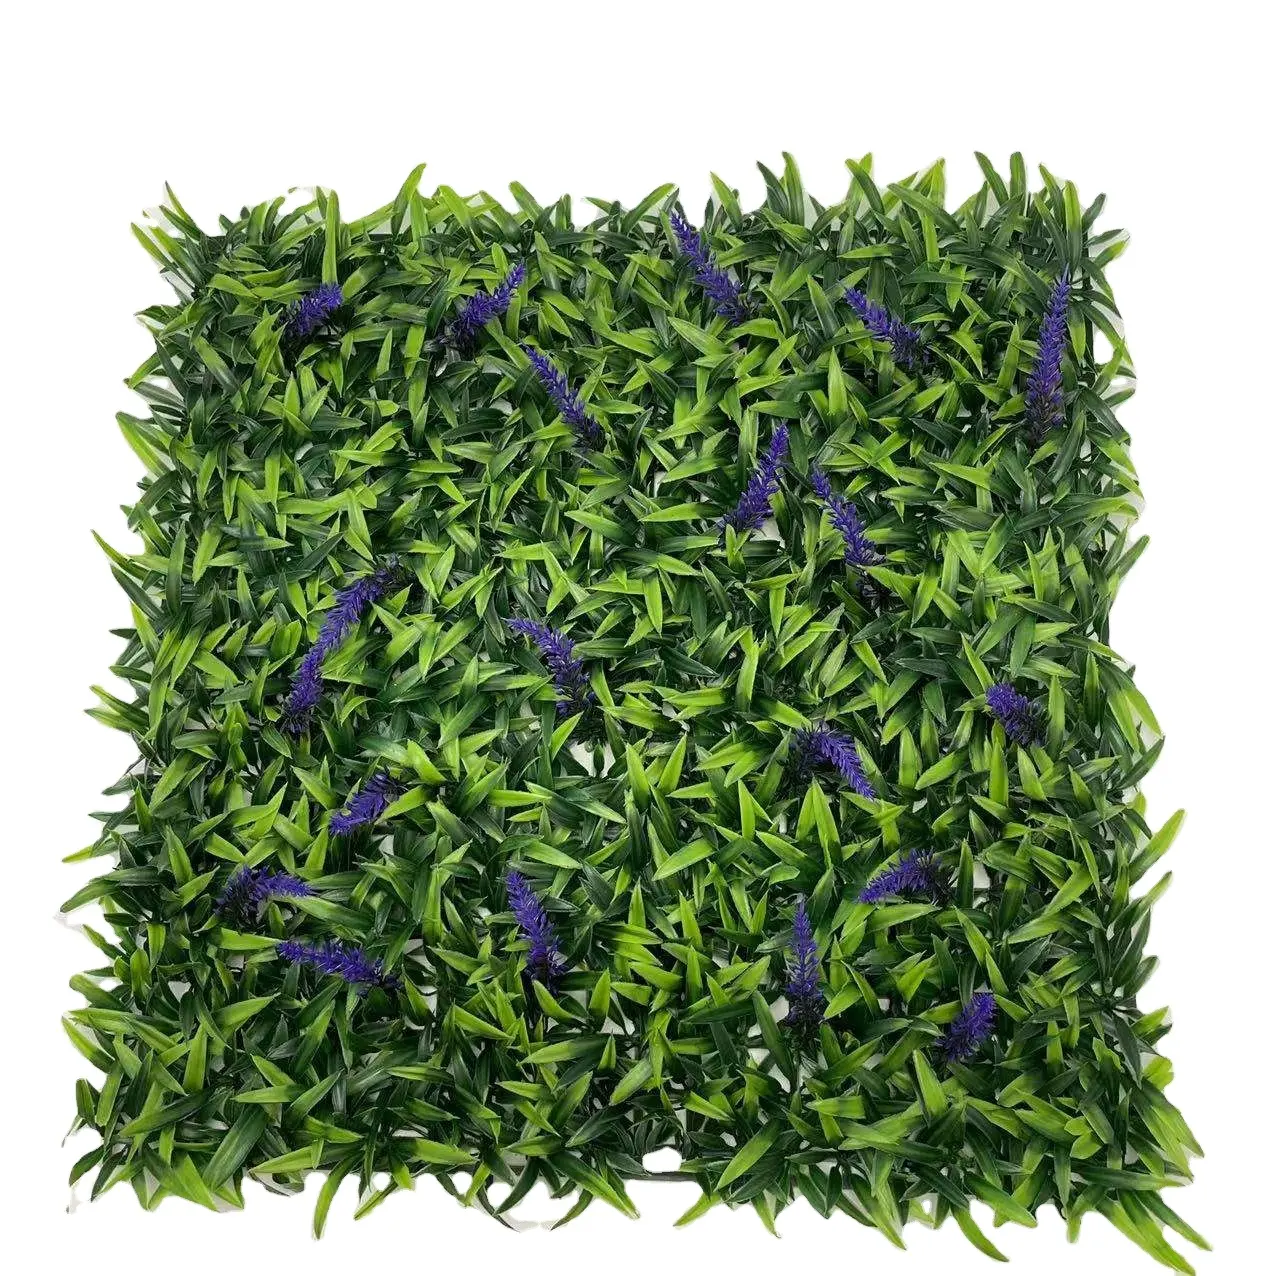 High Quality Turf Garden Artificial Grass Rug Decoration Special Artificial Turf Football Field Simulation Lawn